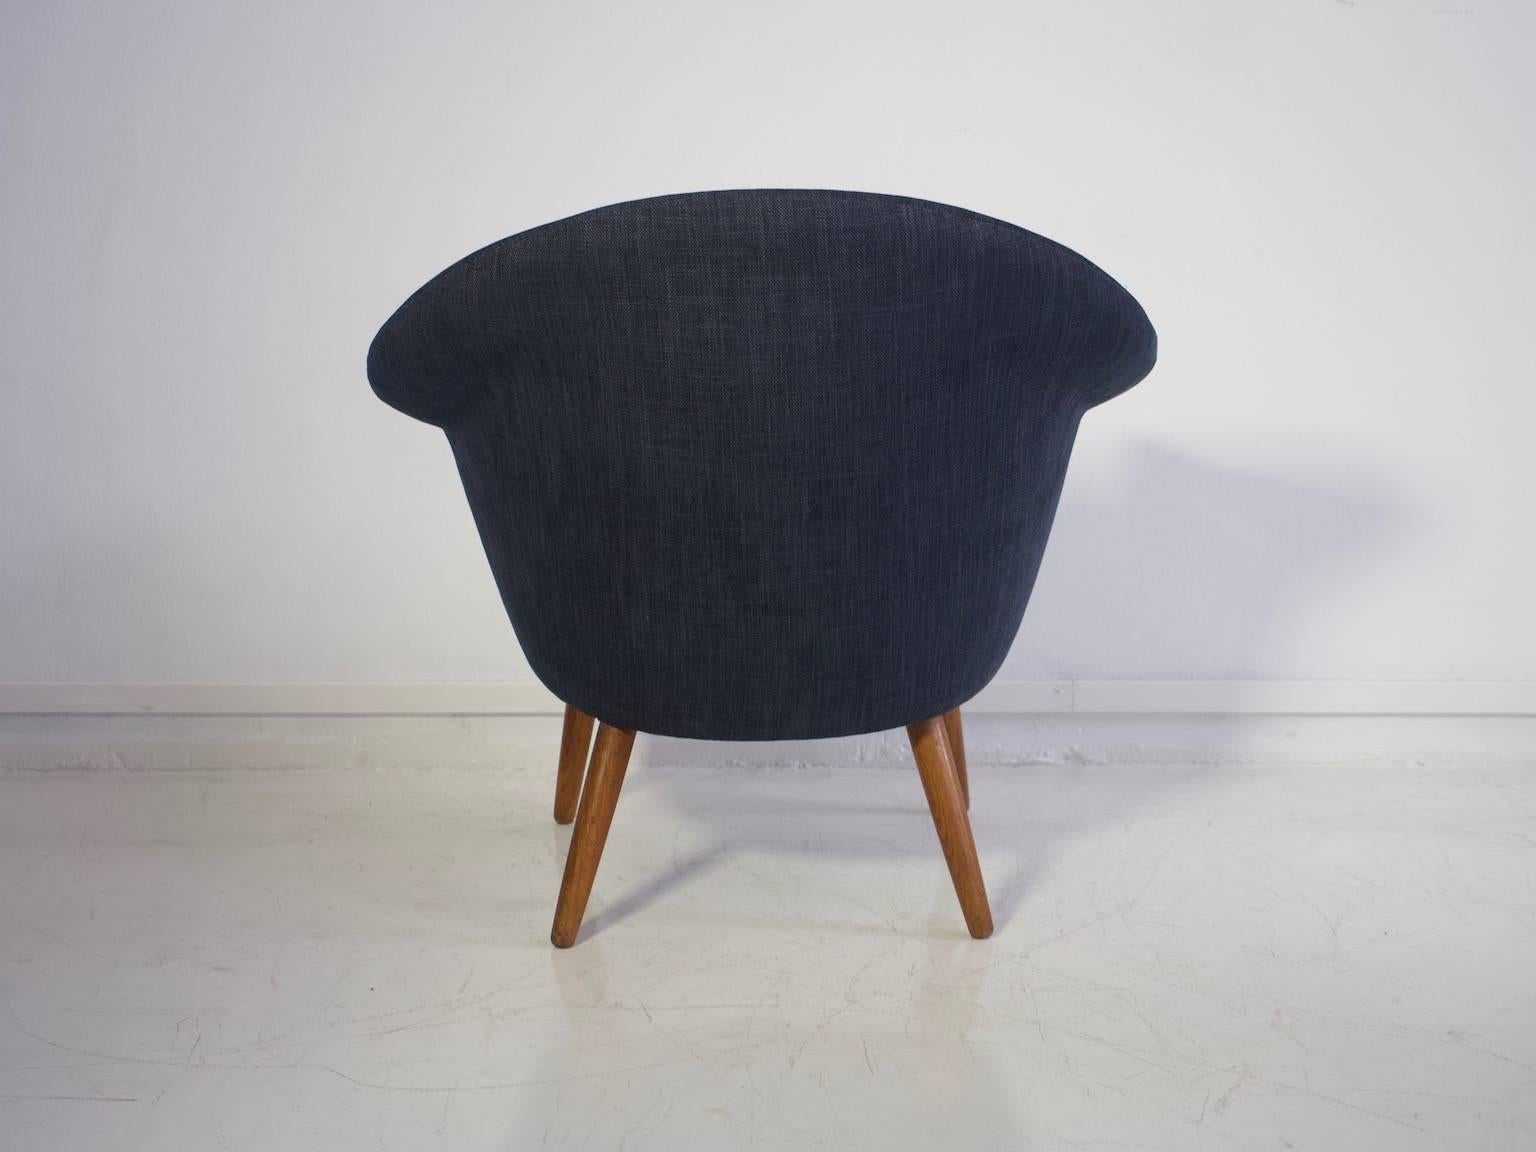 20th Century Lounge Chair Upholstered with Dark Blue Fabric and Cognac Leather on Oak Legs